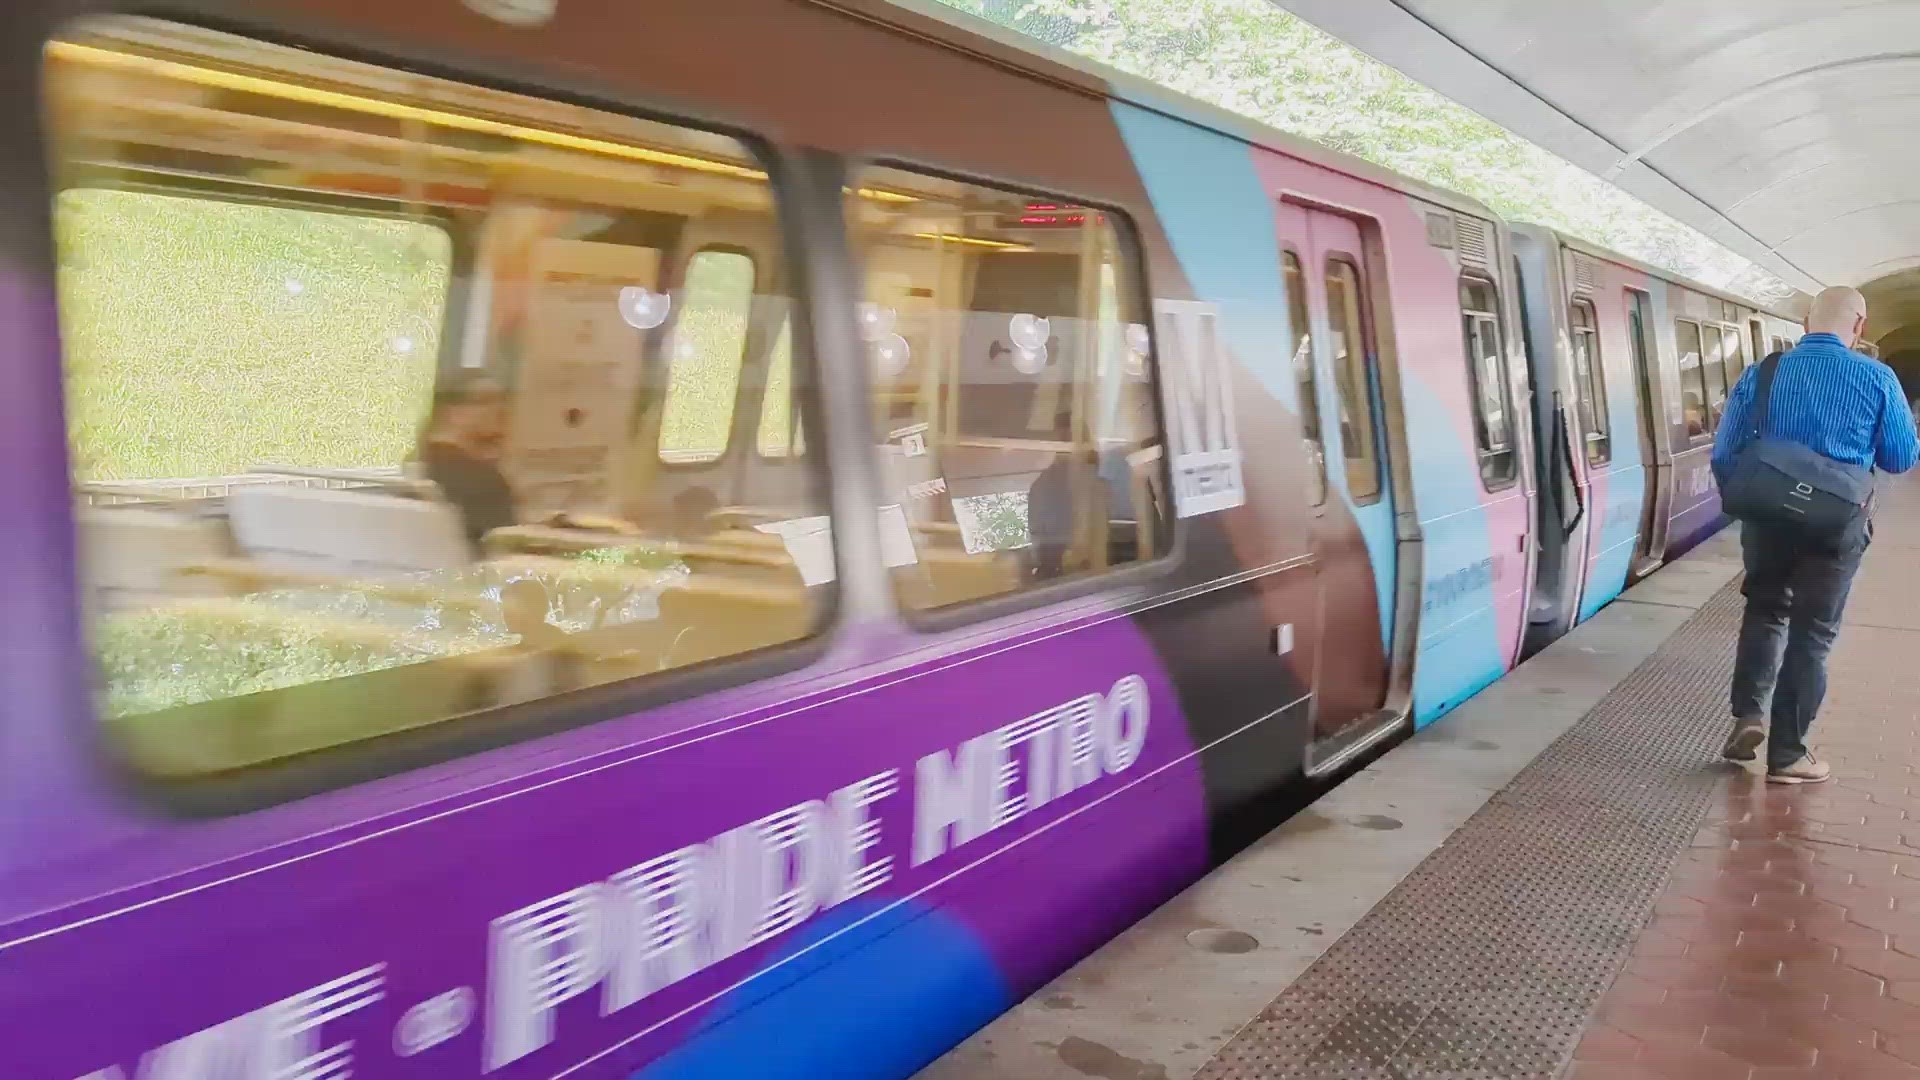 To launch Pride month, Metro rolled out new trains on June 1 with colorful rainbow wrapping. (Video: Reddit user @billnino)